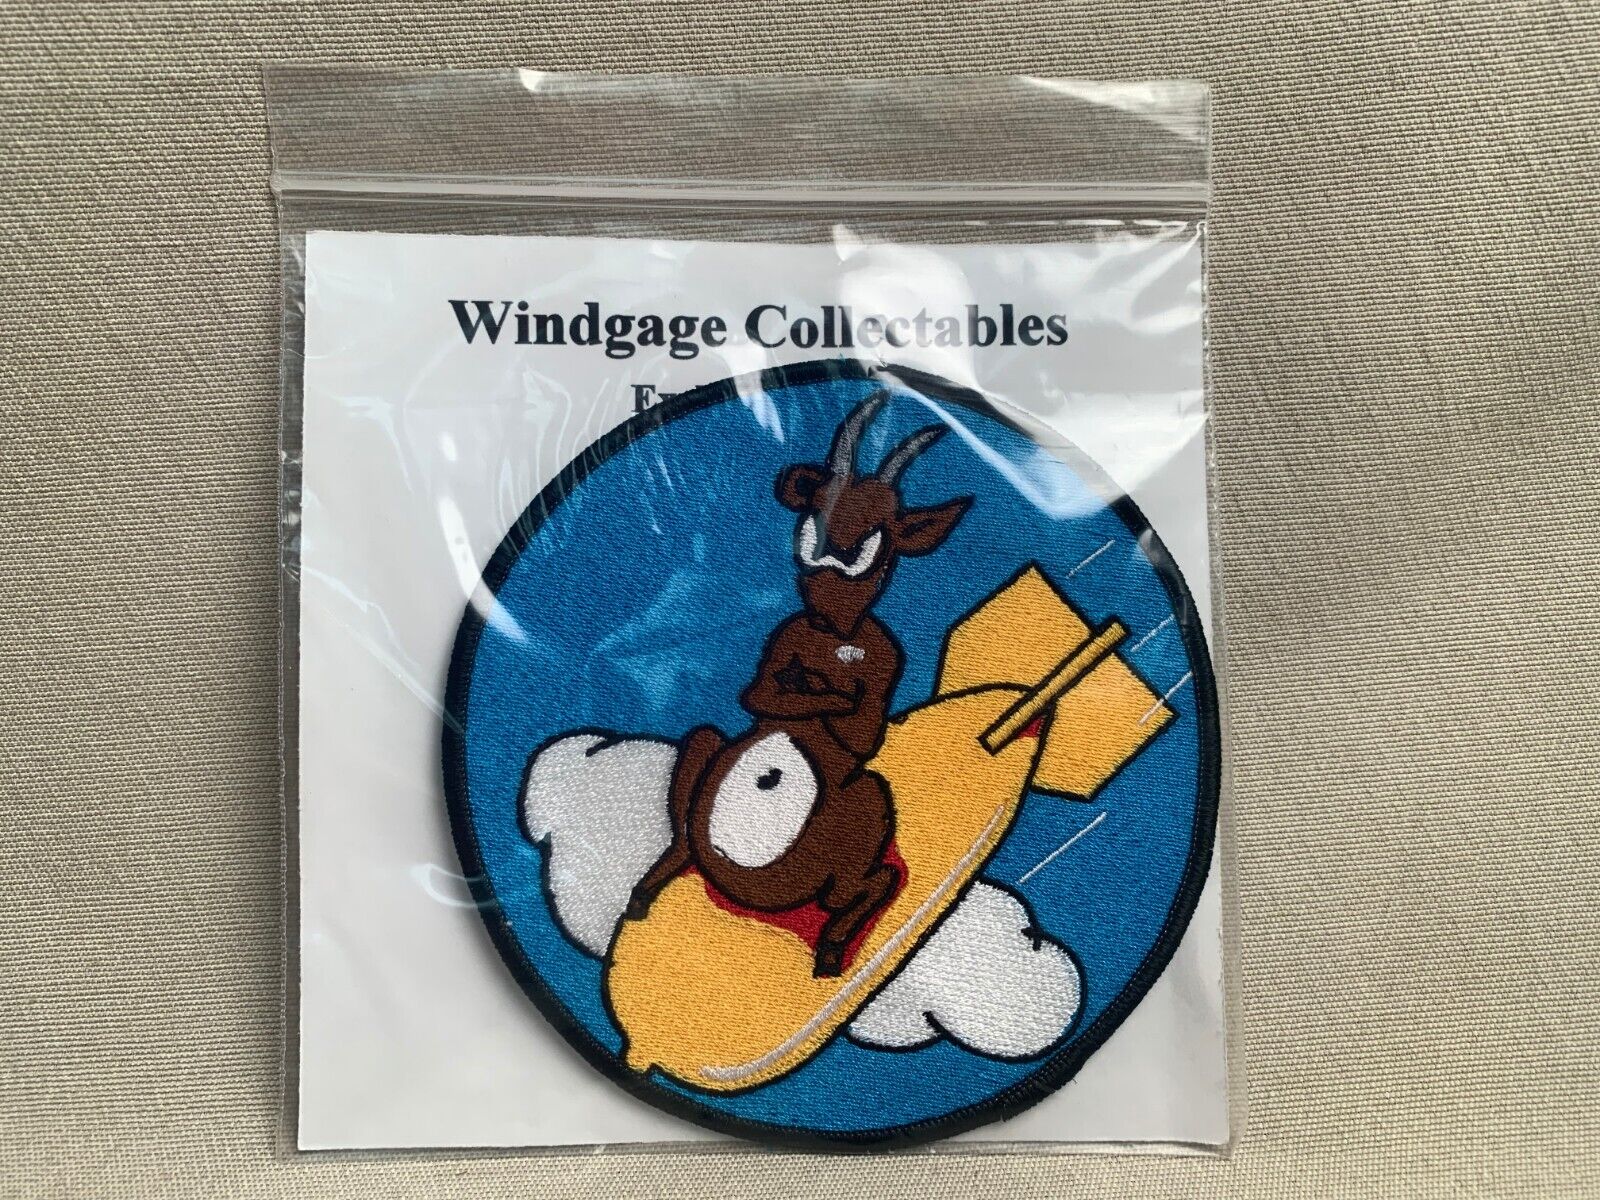 Windgage Collectibles Iron On Patch - 1010 - WWII Patches 91st Bombardment Group